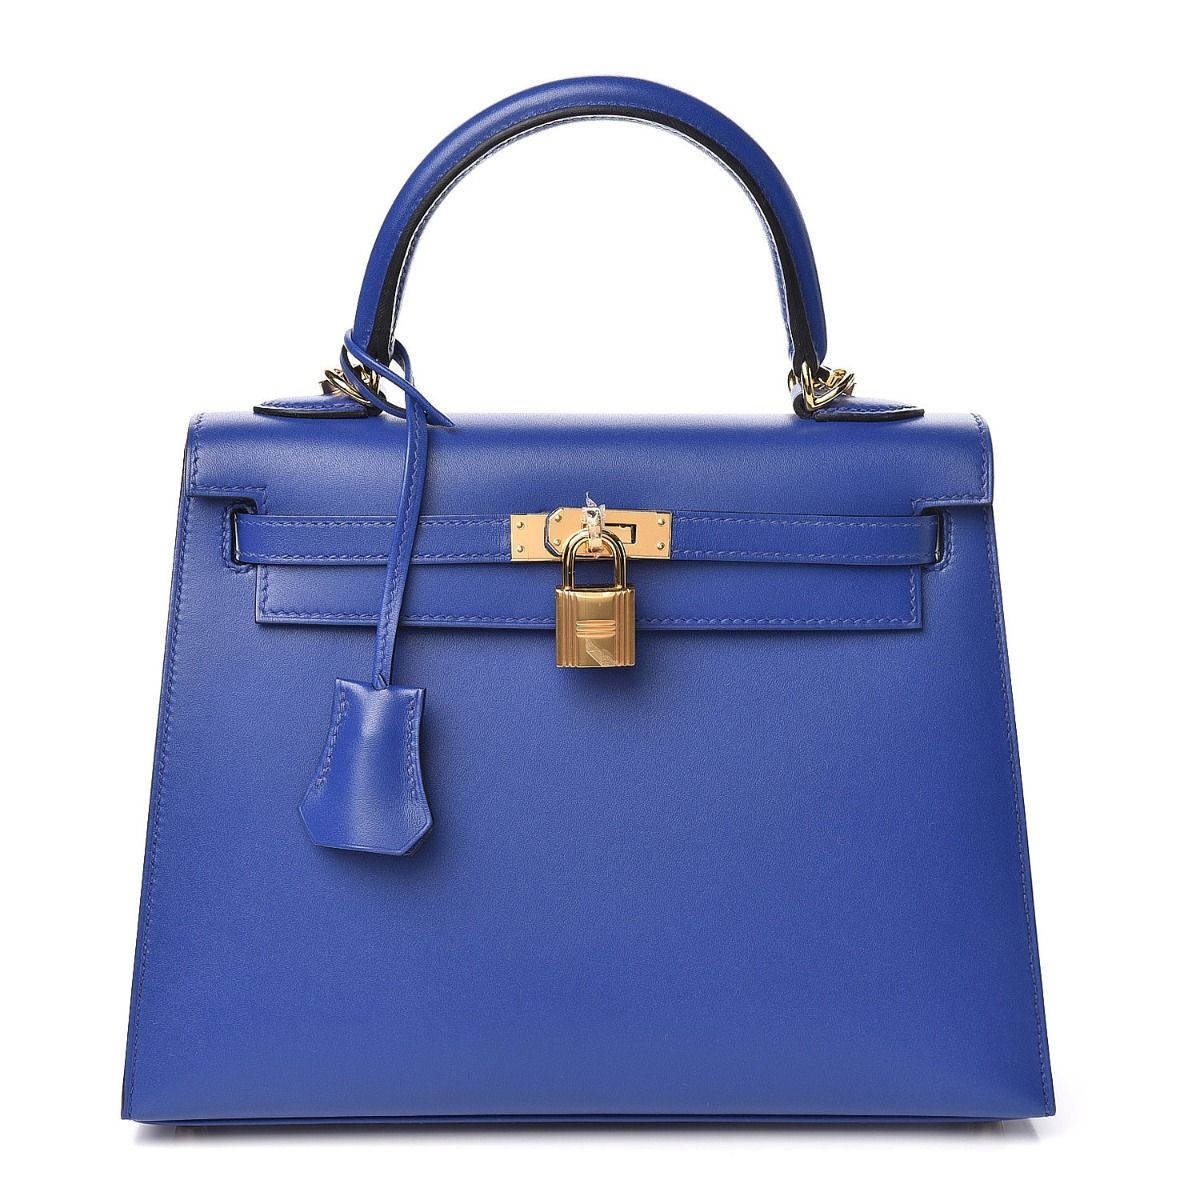 Hermes 25cm Bleu Electric Epsom Leather Gold Plated Kelly Sellier